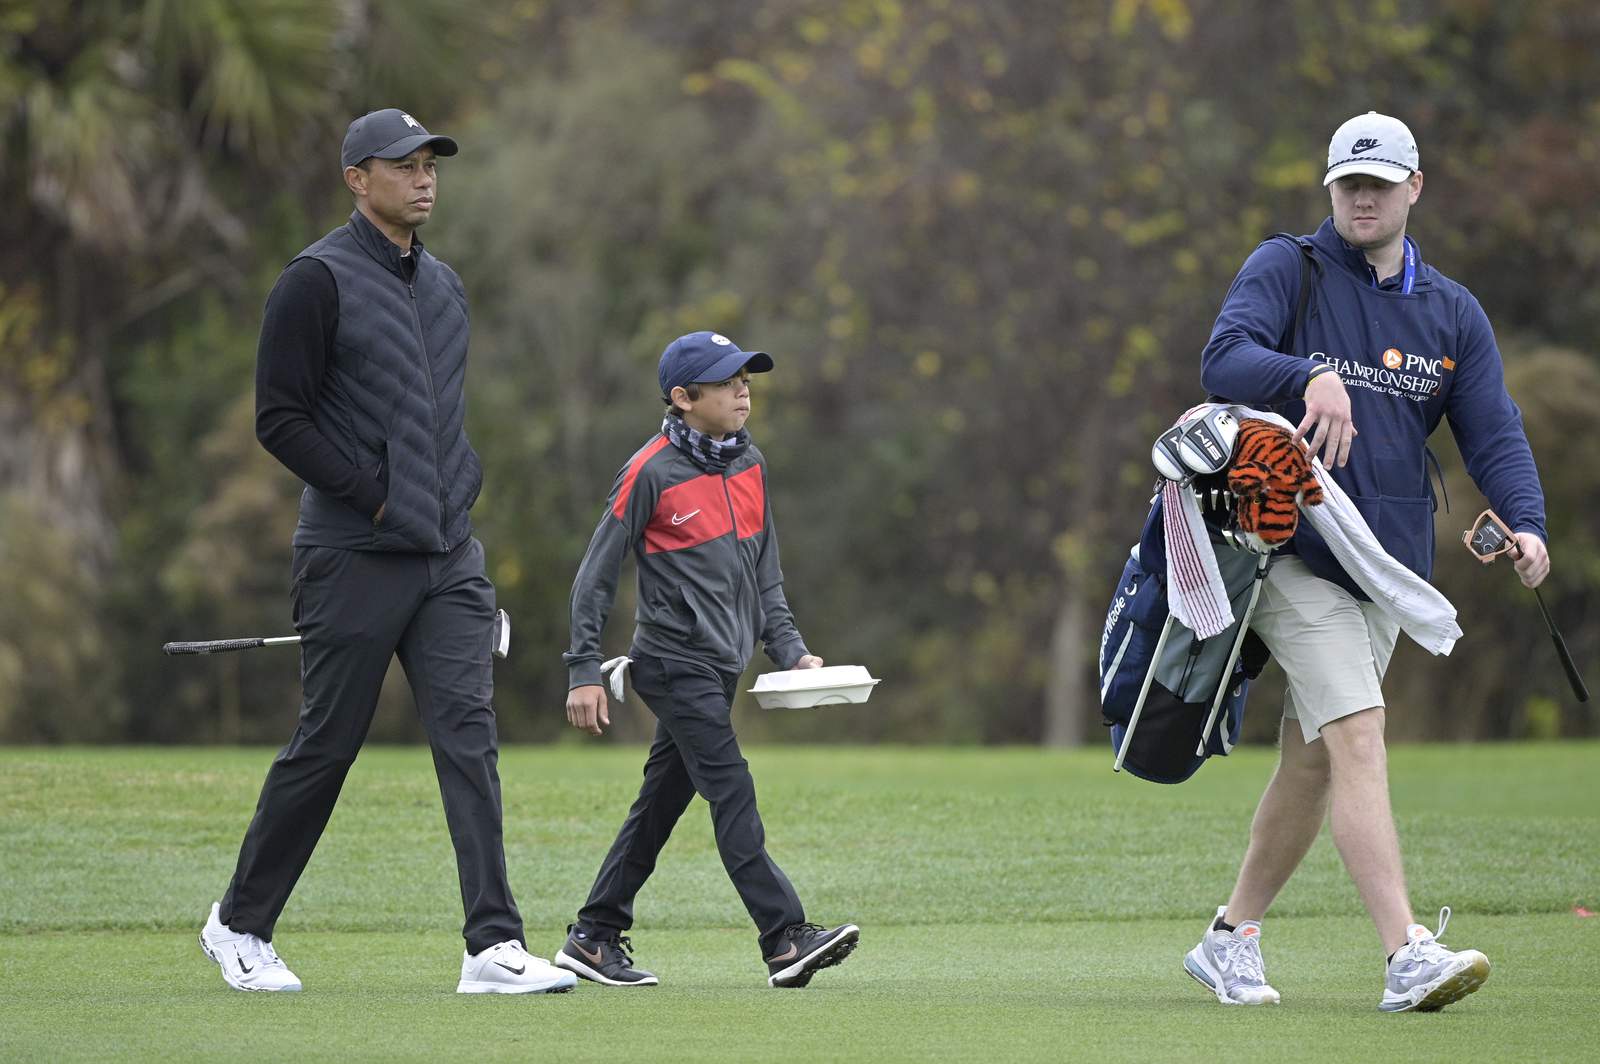 When it's Tiger Woods, the son becomes more famous than dad